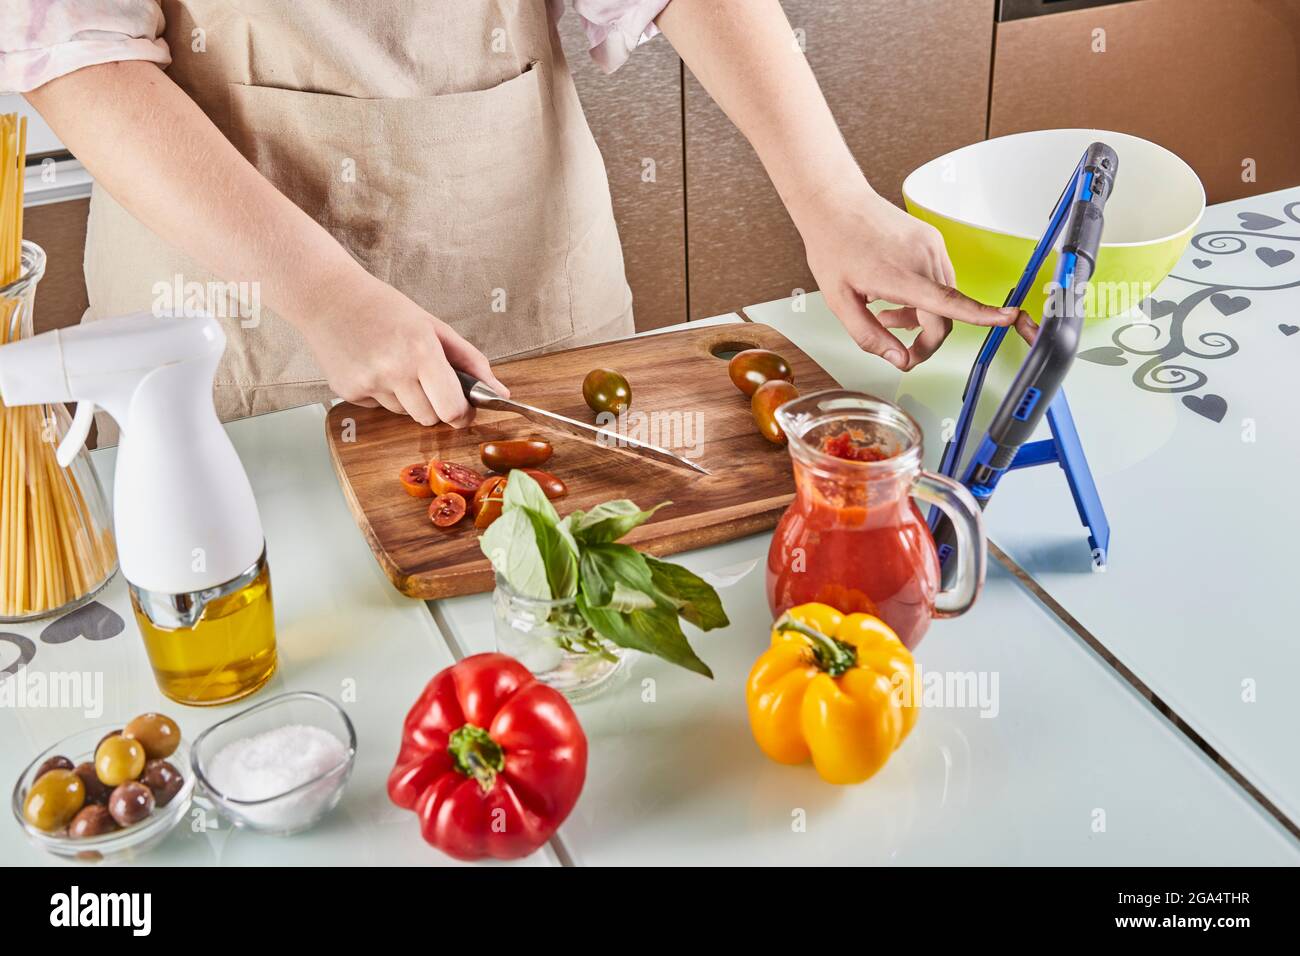 Teenager slides his finger across the tablet screen while cooking through virtual online master class, watches digital recipe while preparing a Stock Photo